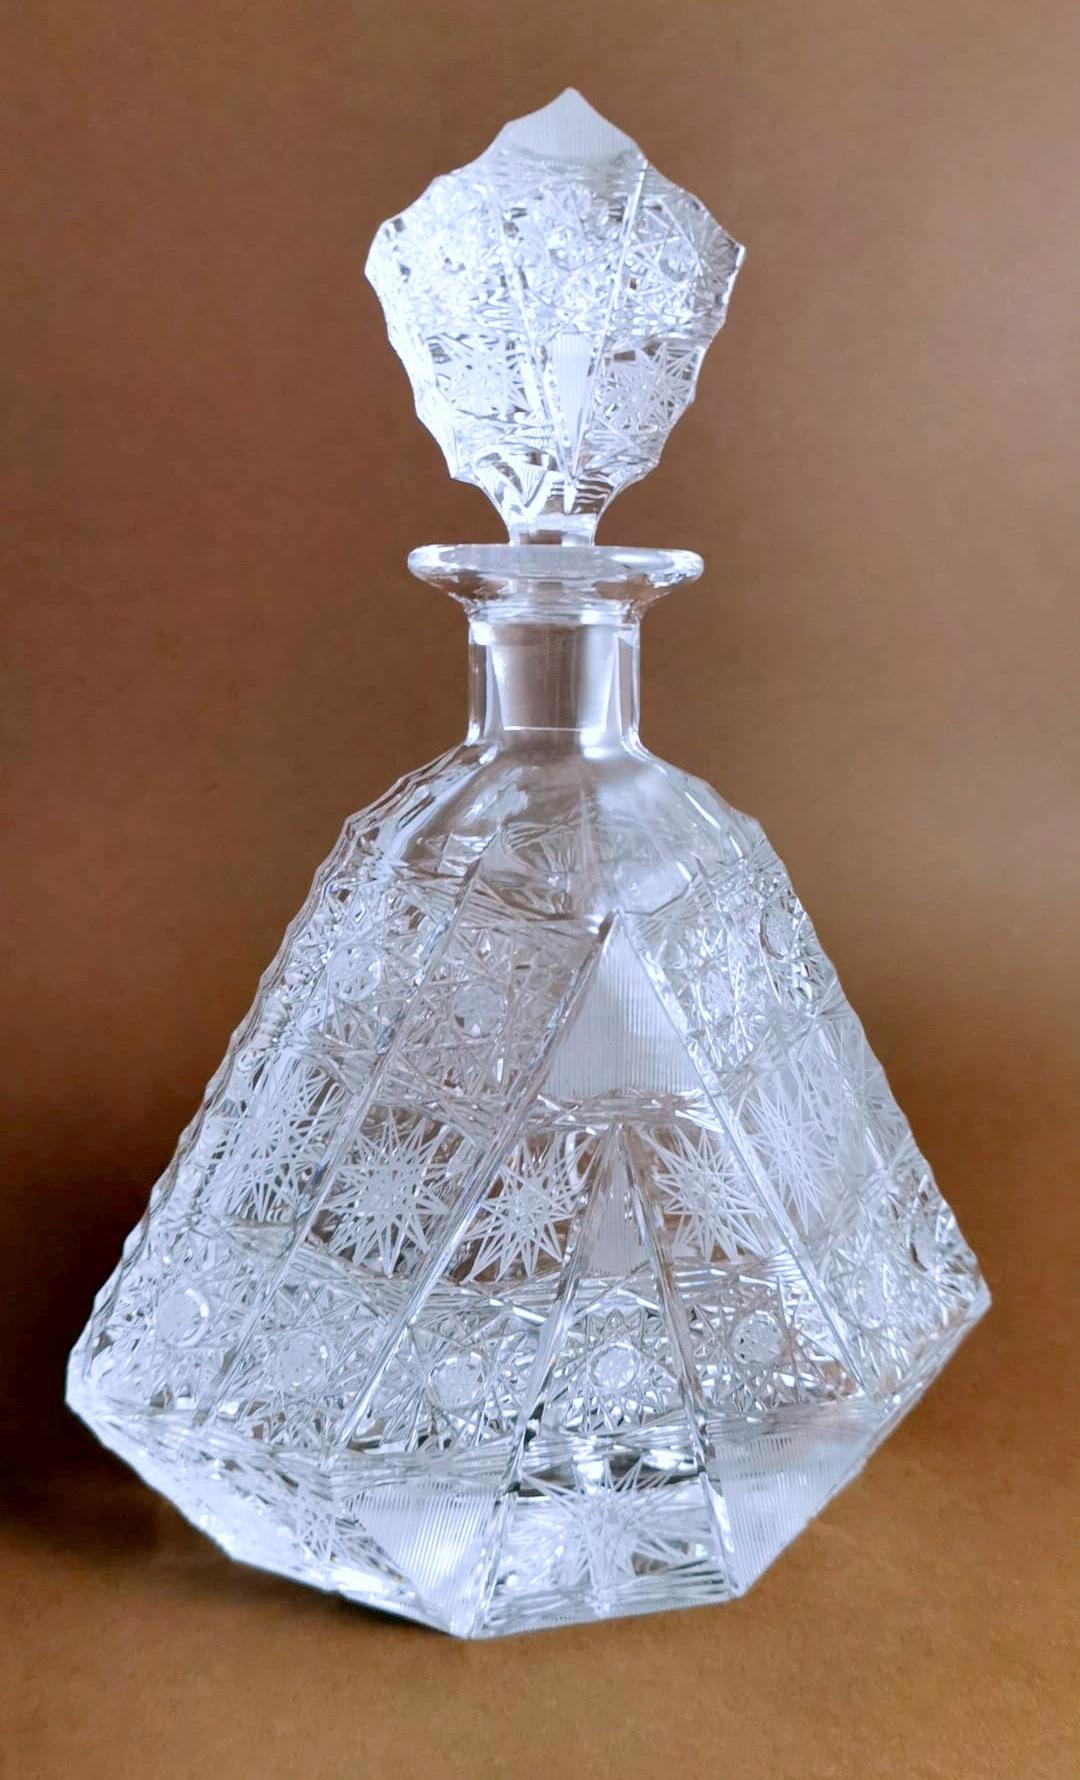 We kindly suggest that you read the entire description, as with it we try to give you detailed technical and historical information to guarantee the authenticity of our objects.
Hand-cut and ground crystal bottle; its shape is unusual and peculiar,